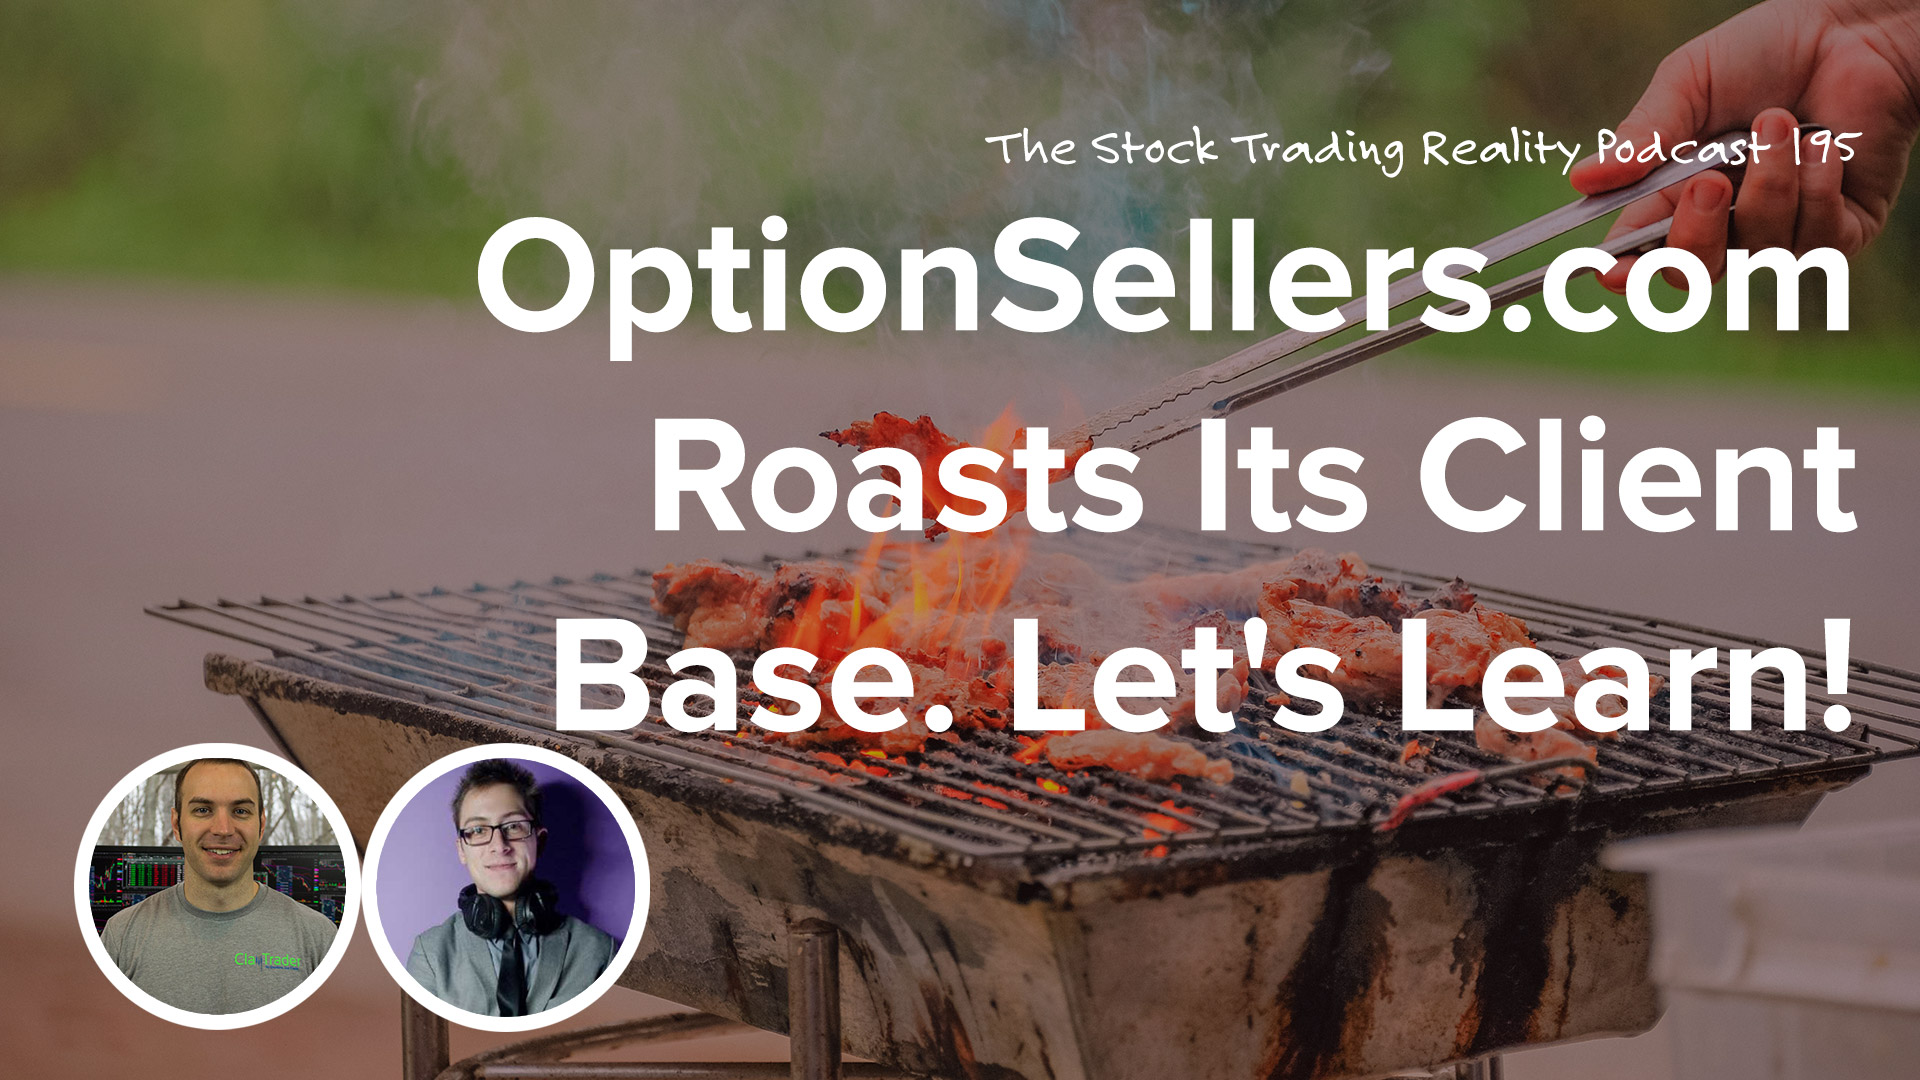 STR 195: OptionSellers.com Roasts Its Client Base. Let's Learn!